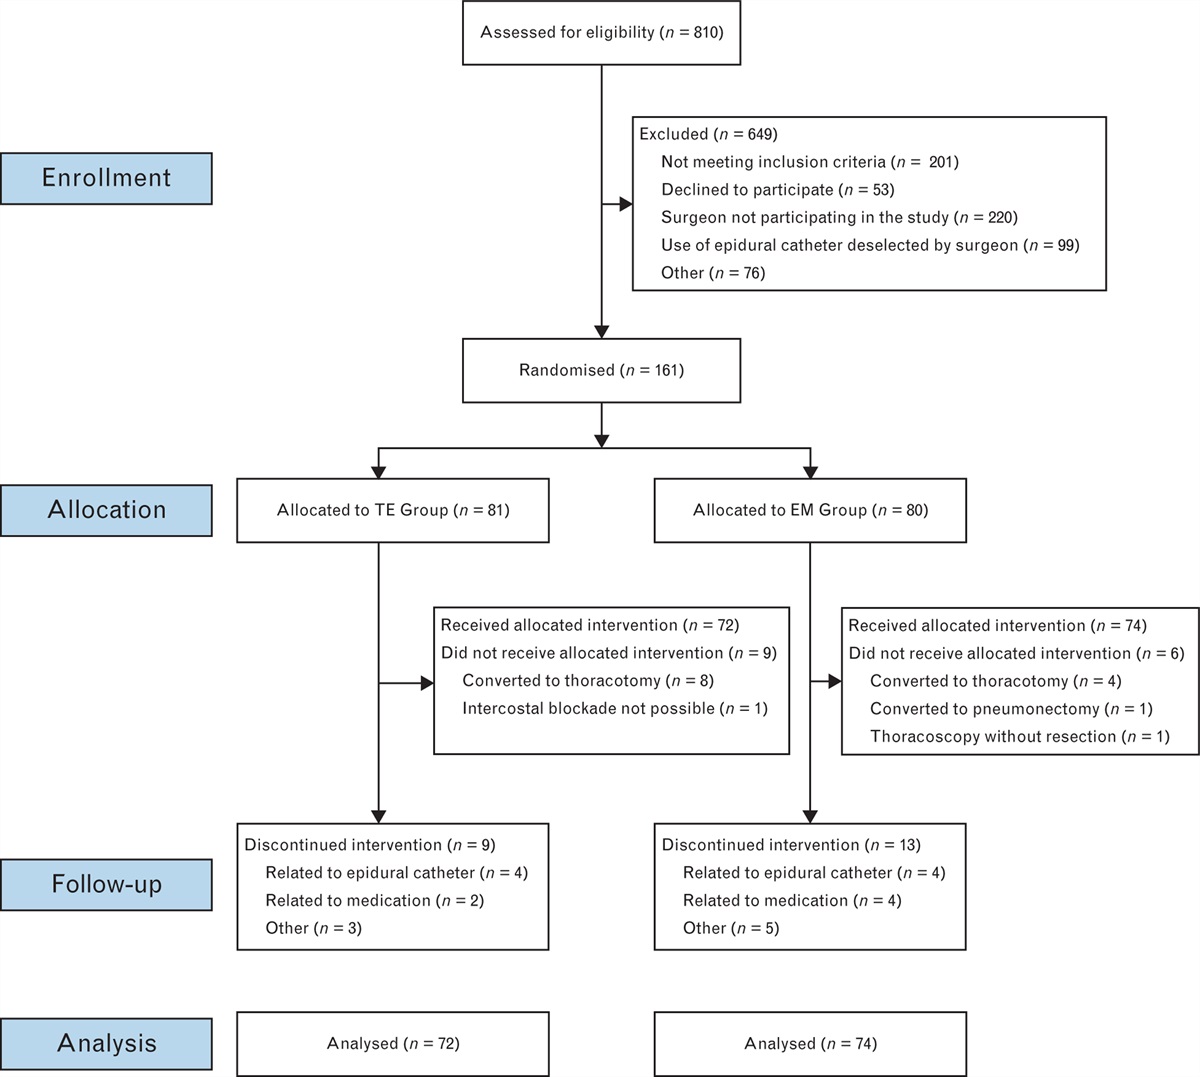 Epidural analgesia versus oral morphine for postoperative pain management following video-assisted thoracic surgery: A randomised, controlled, double-blind trial